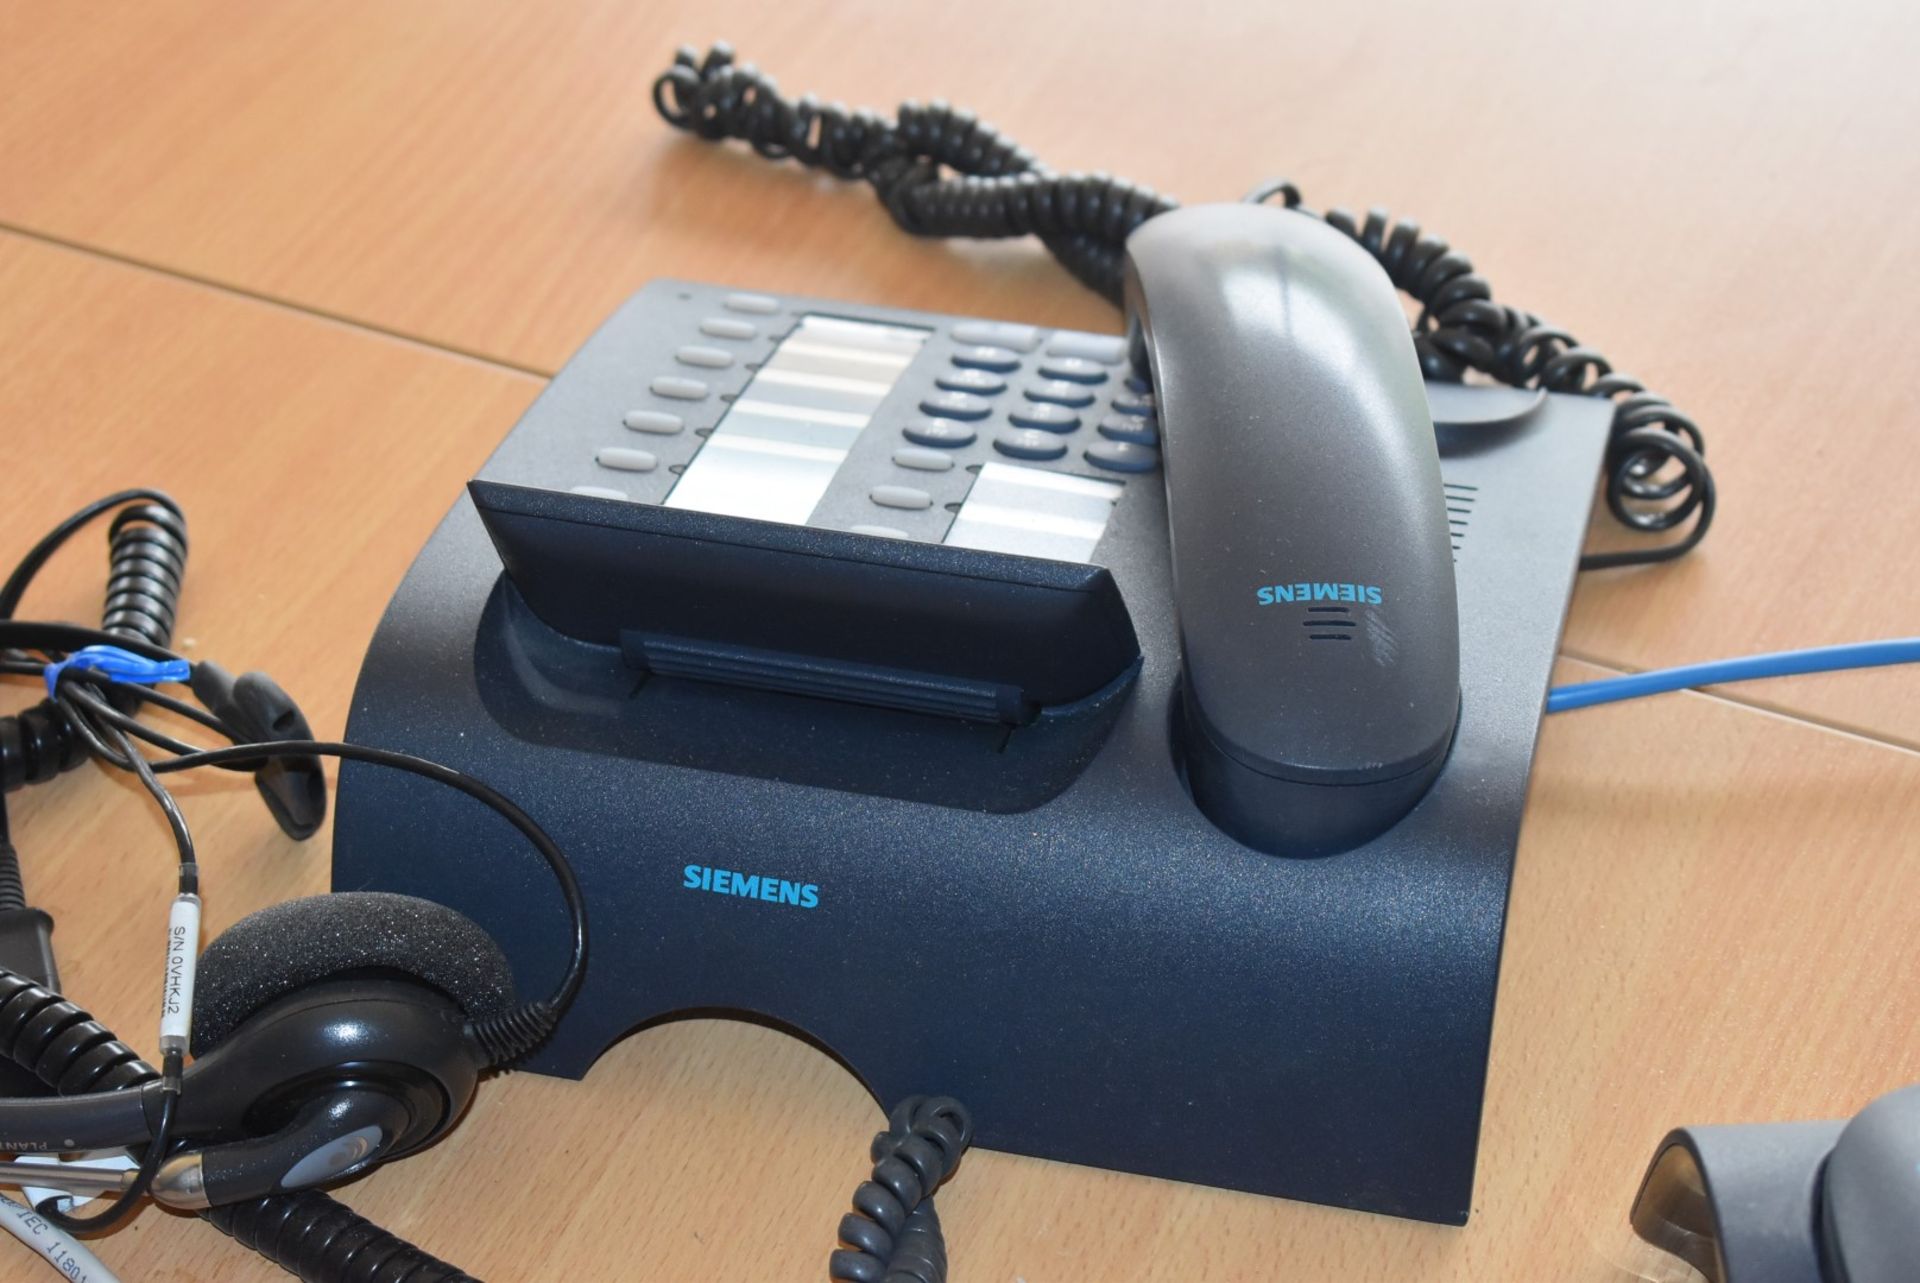 30 x Siemens Optipoint 410 Econemy Plus Office Telephone Handsets - CL529 - Location: Wakefield WF2 - Image 3 of 4